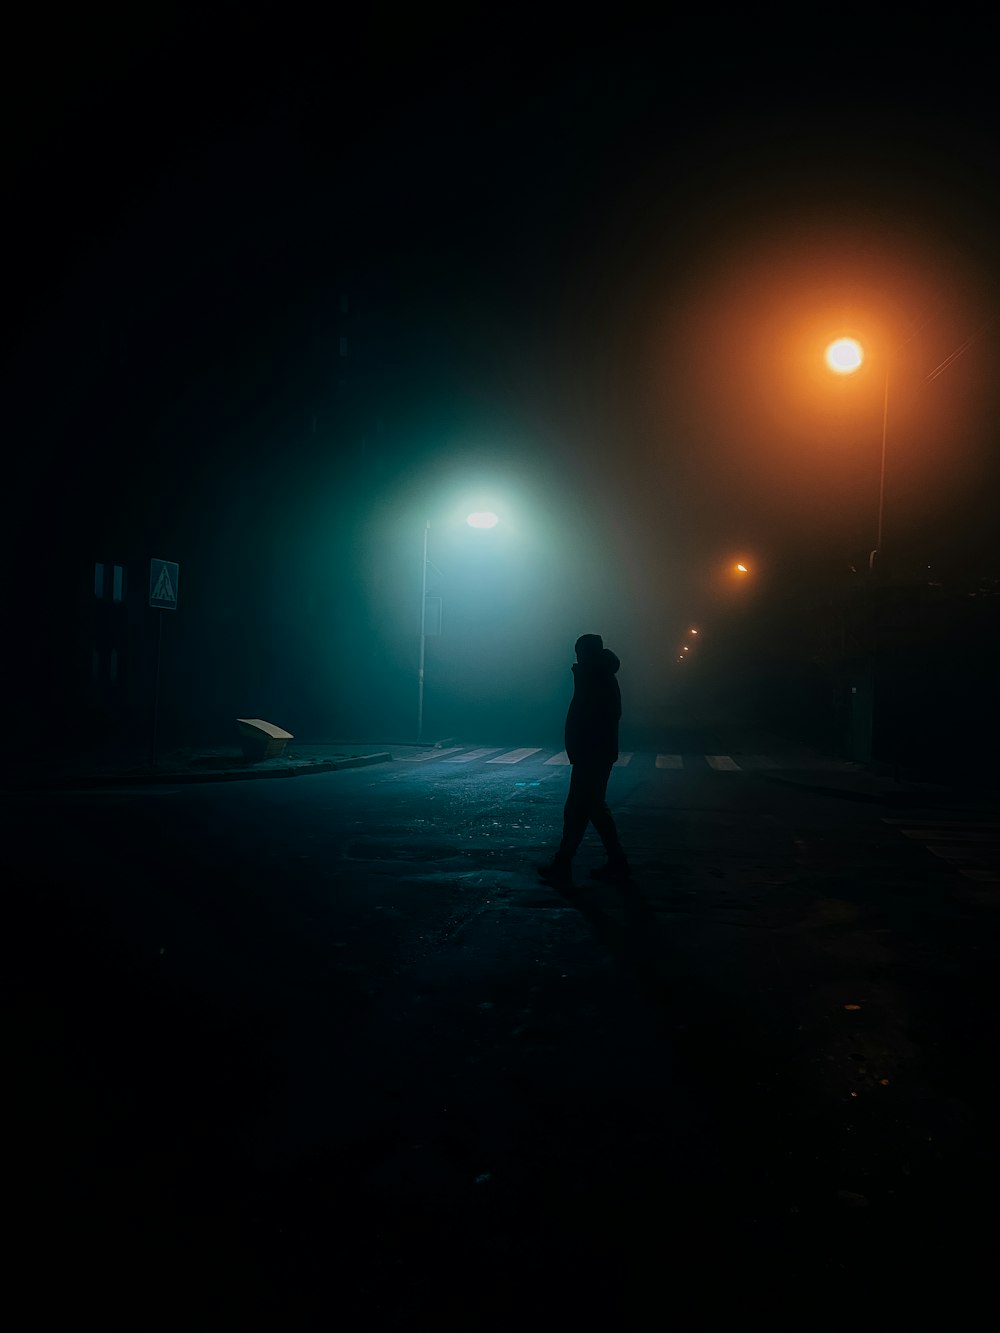 a person standing in a dark area with street lights